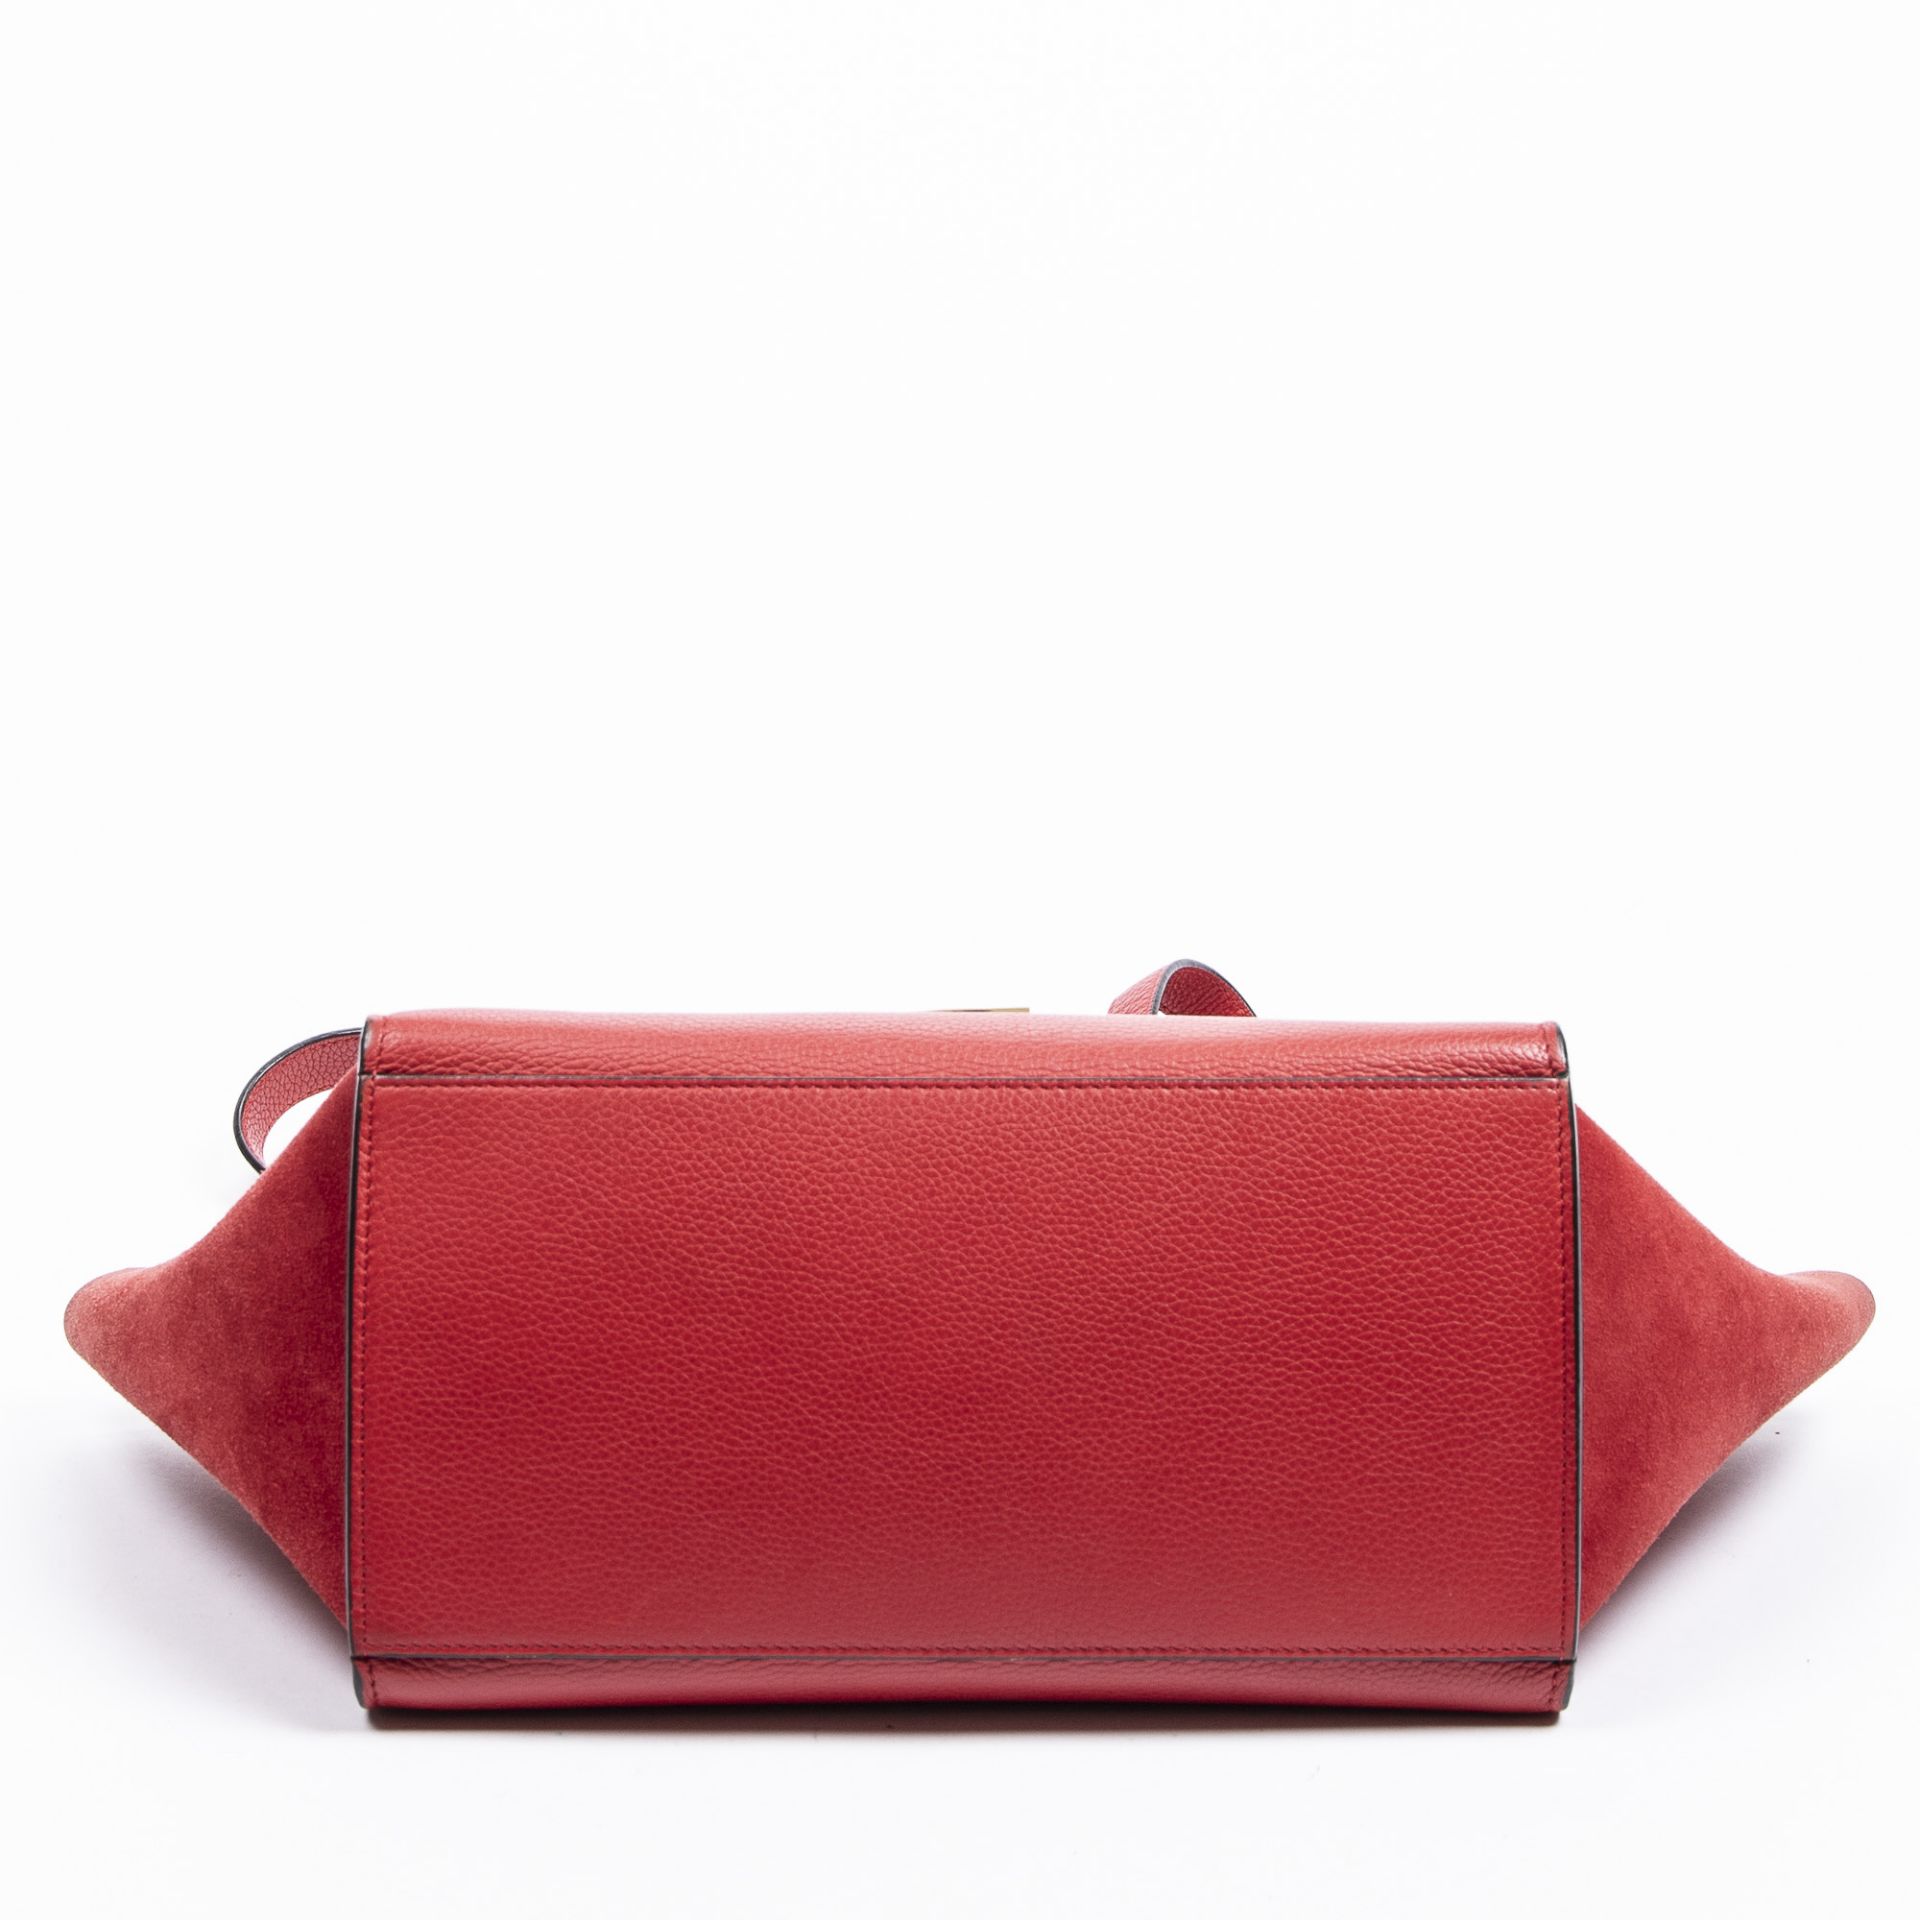 RRP £1200 A Red Celine Small Trapeze Bag Calf Leather Grained Leather 26*20*12cm 26*20*12cm AAR6690 - Image 6 of 7